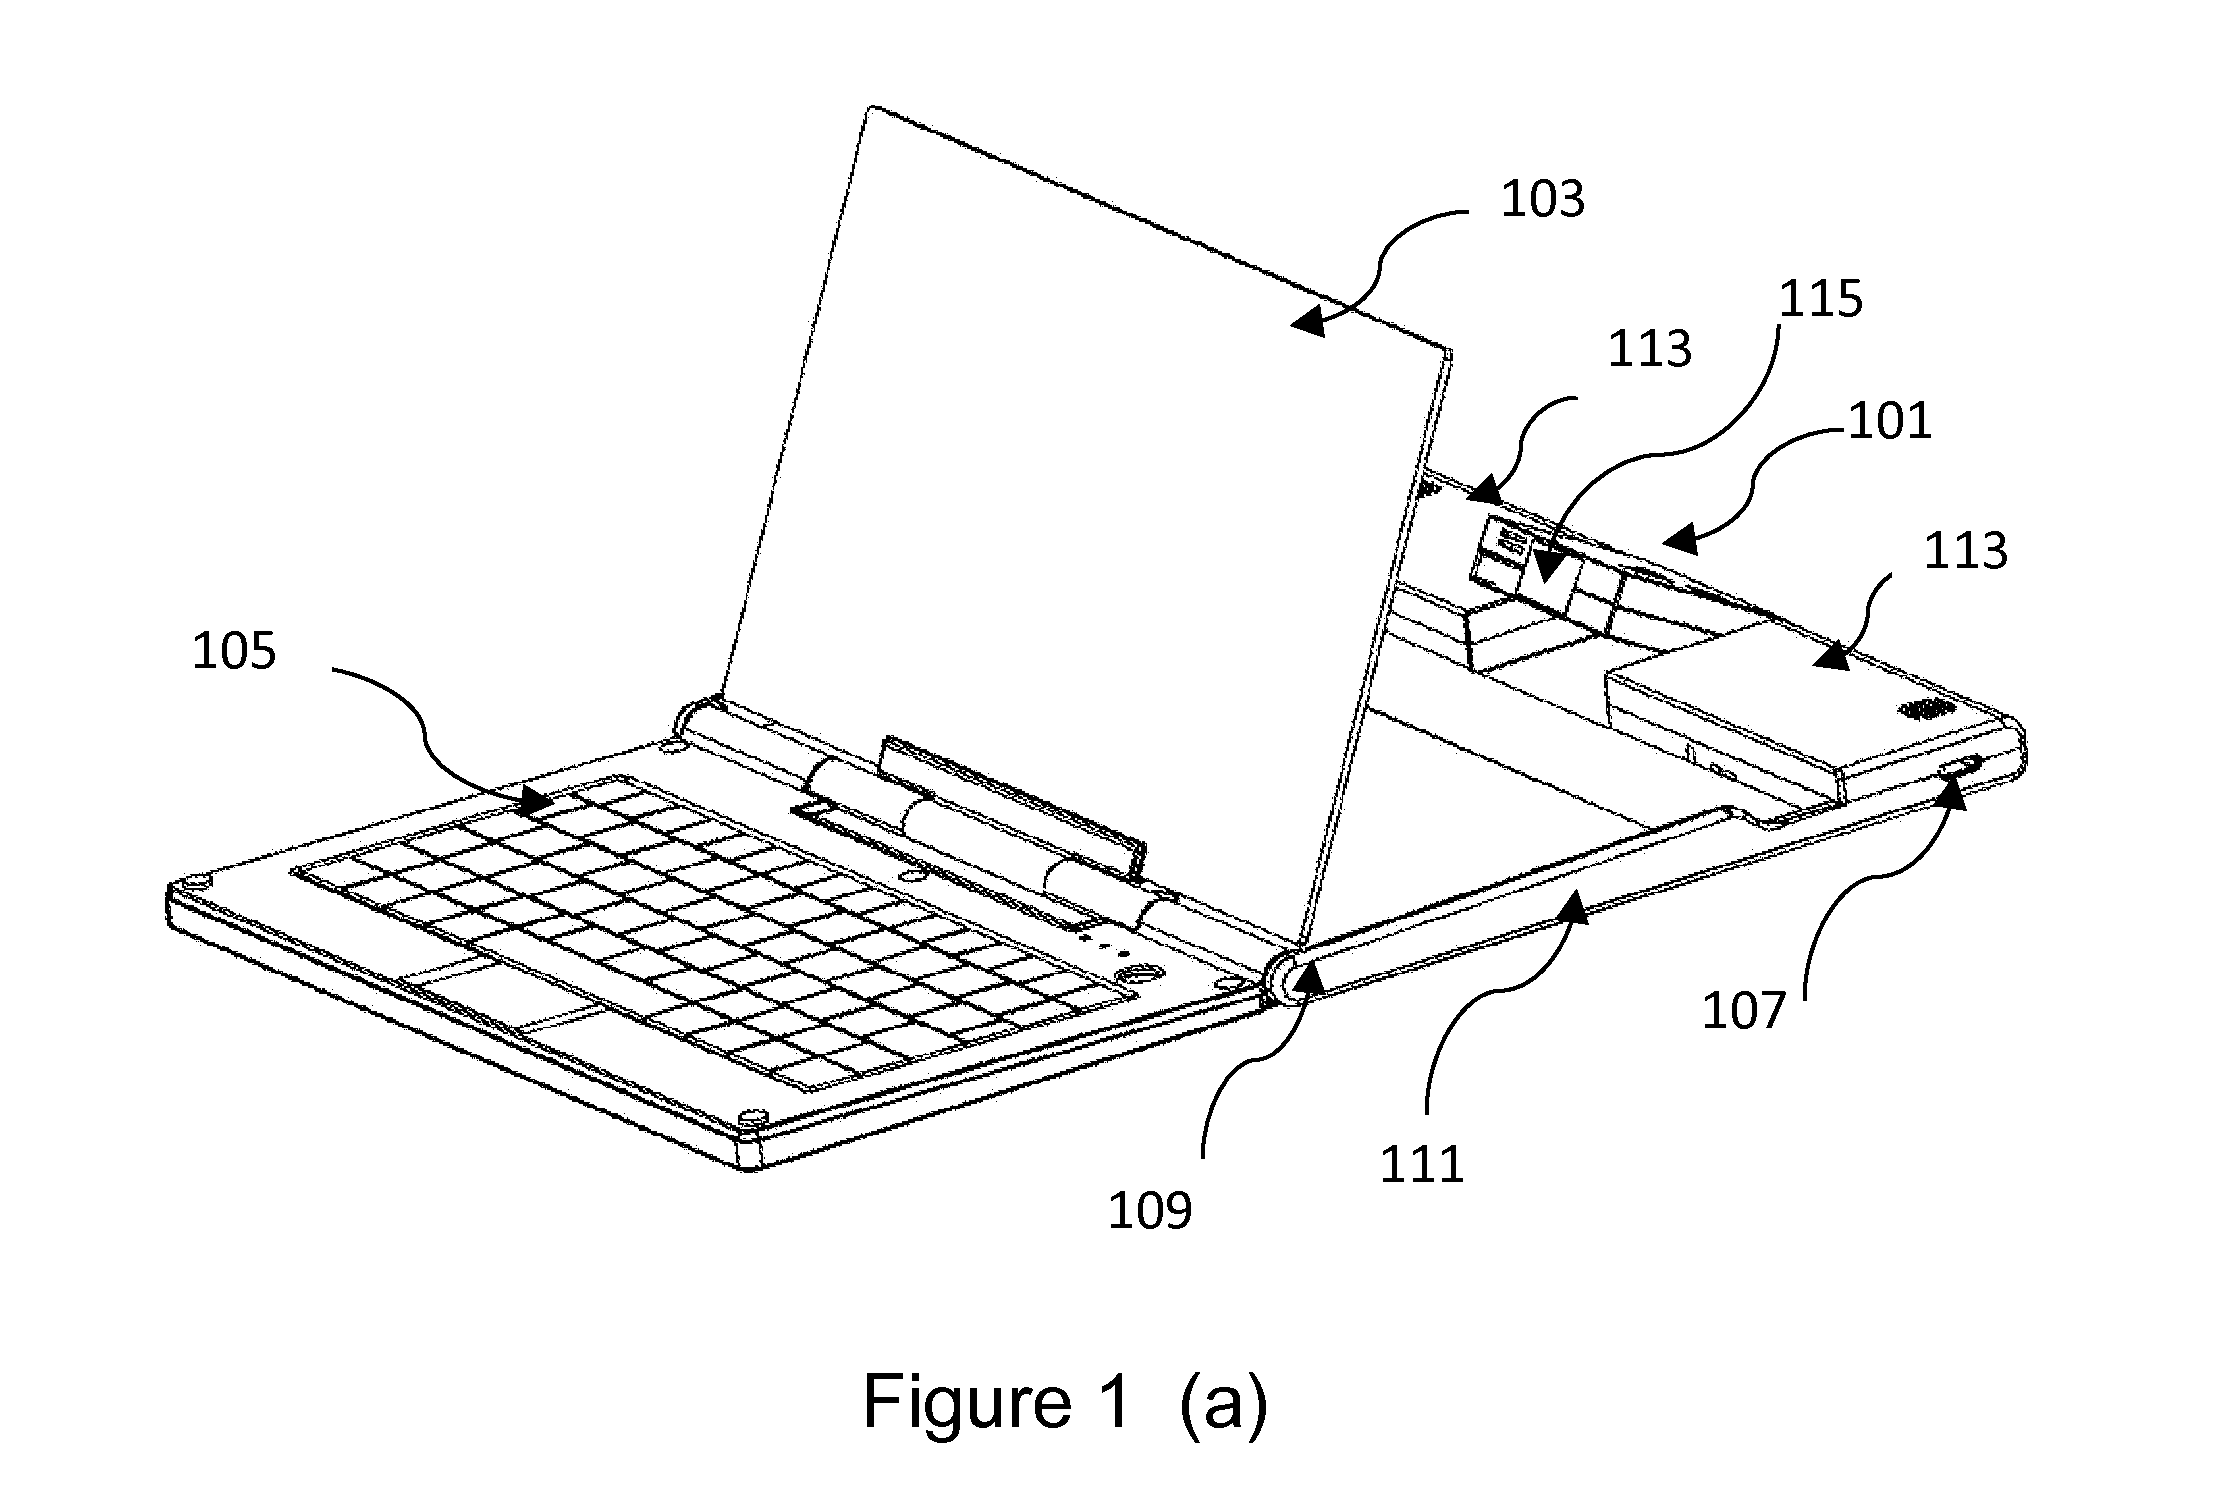 Dual mode projection docking device for portable electronic devices